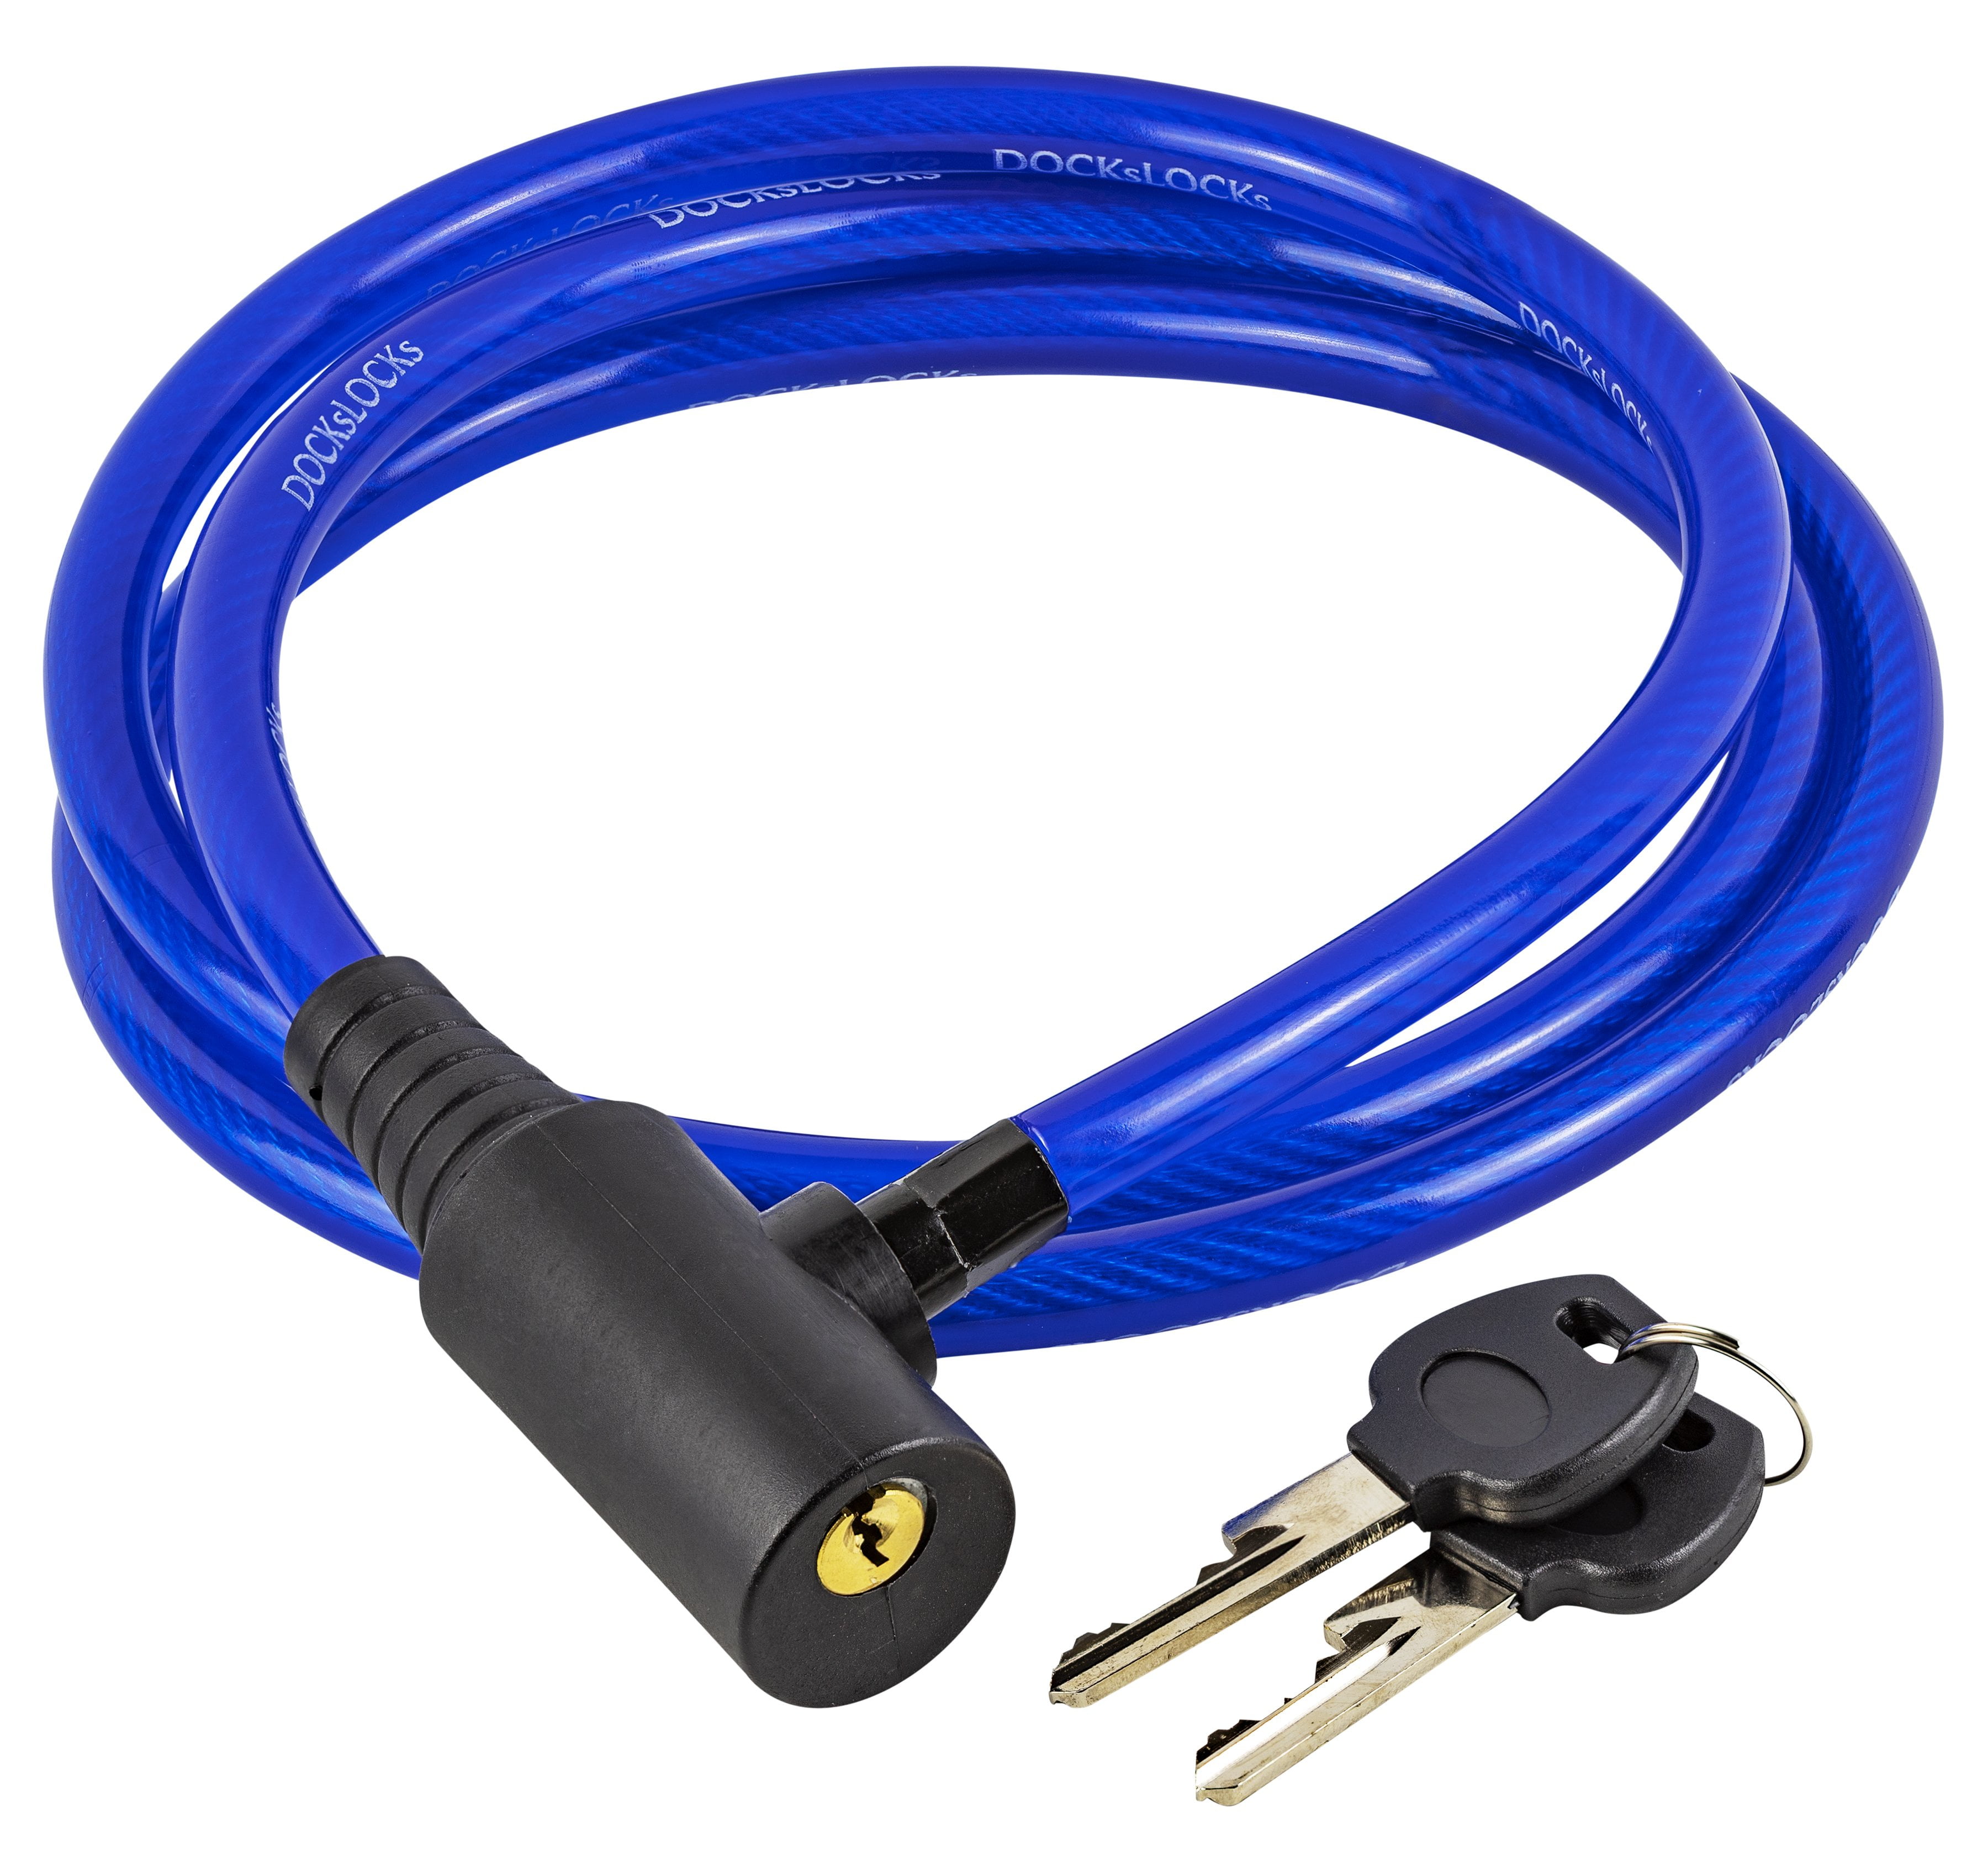 5, 10, 15, 20 or 25 DocksLocks Anti-Theft Weatherproof Straight Security Cable with Key Lock